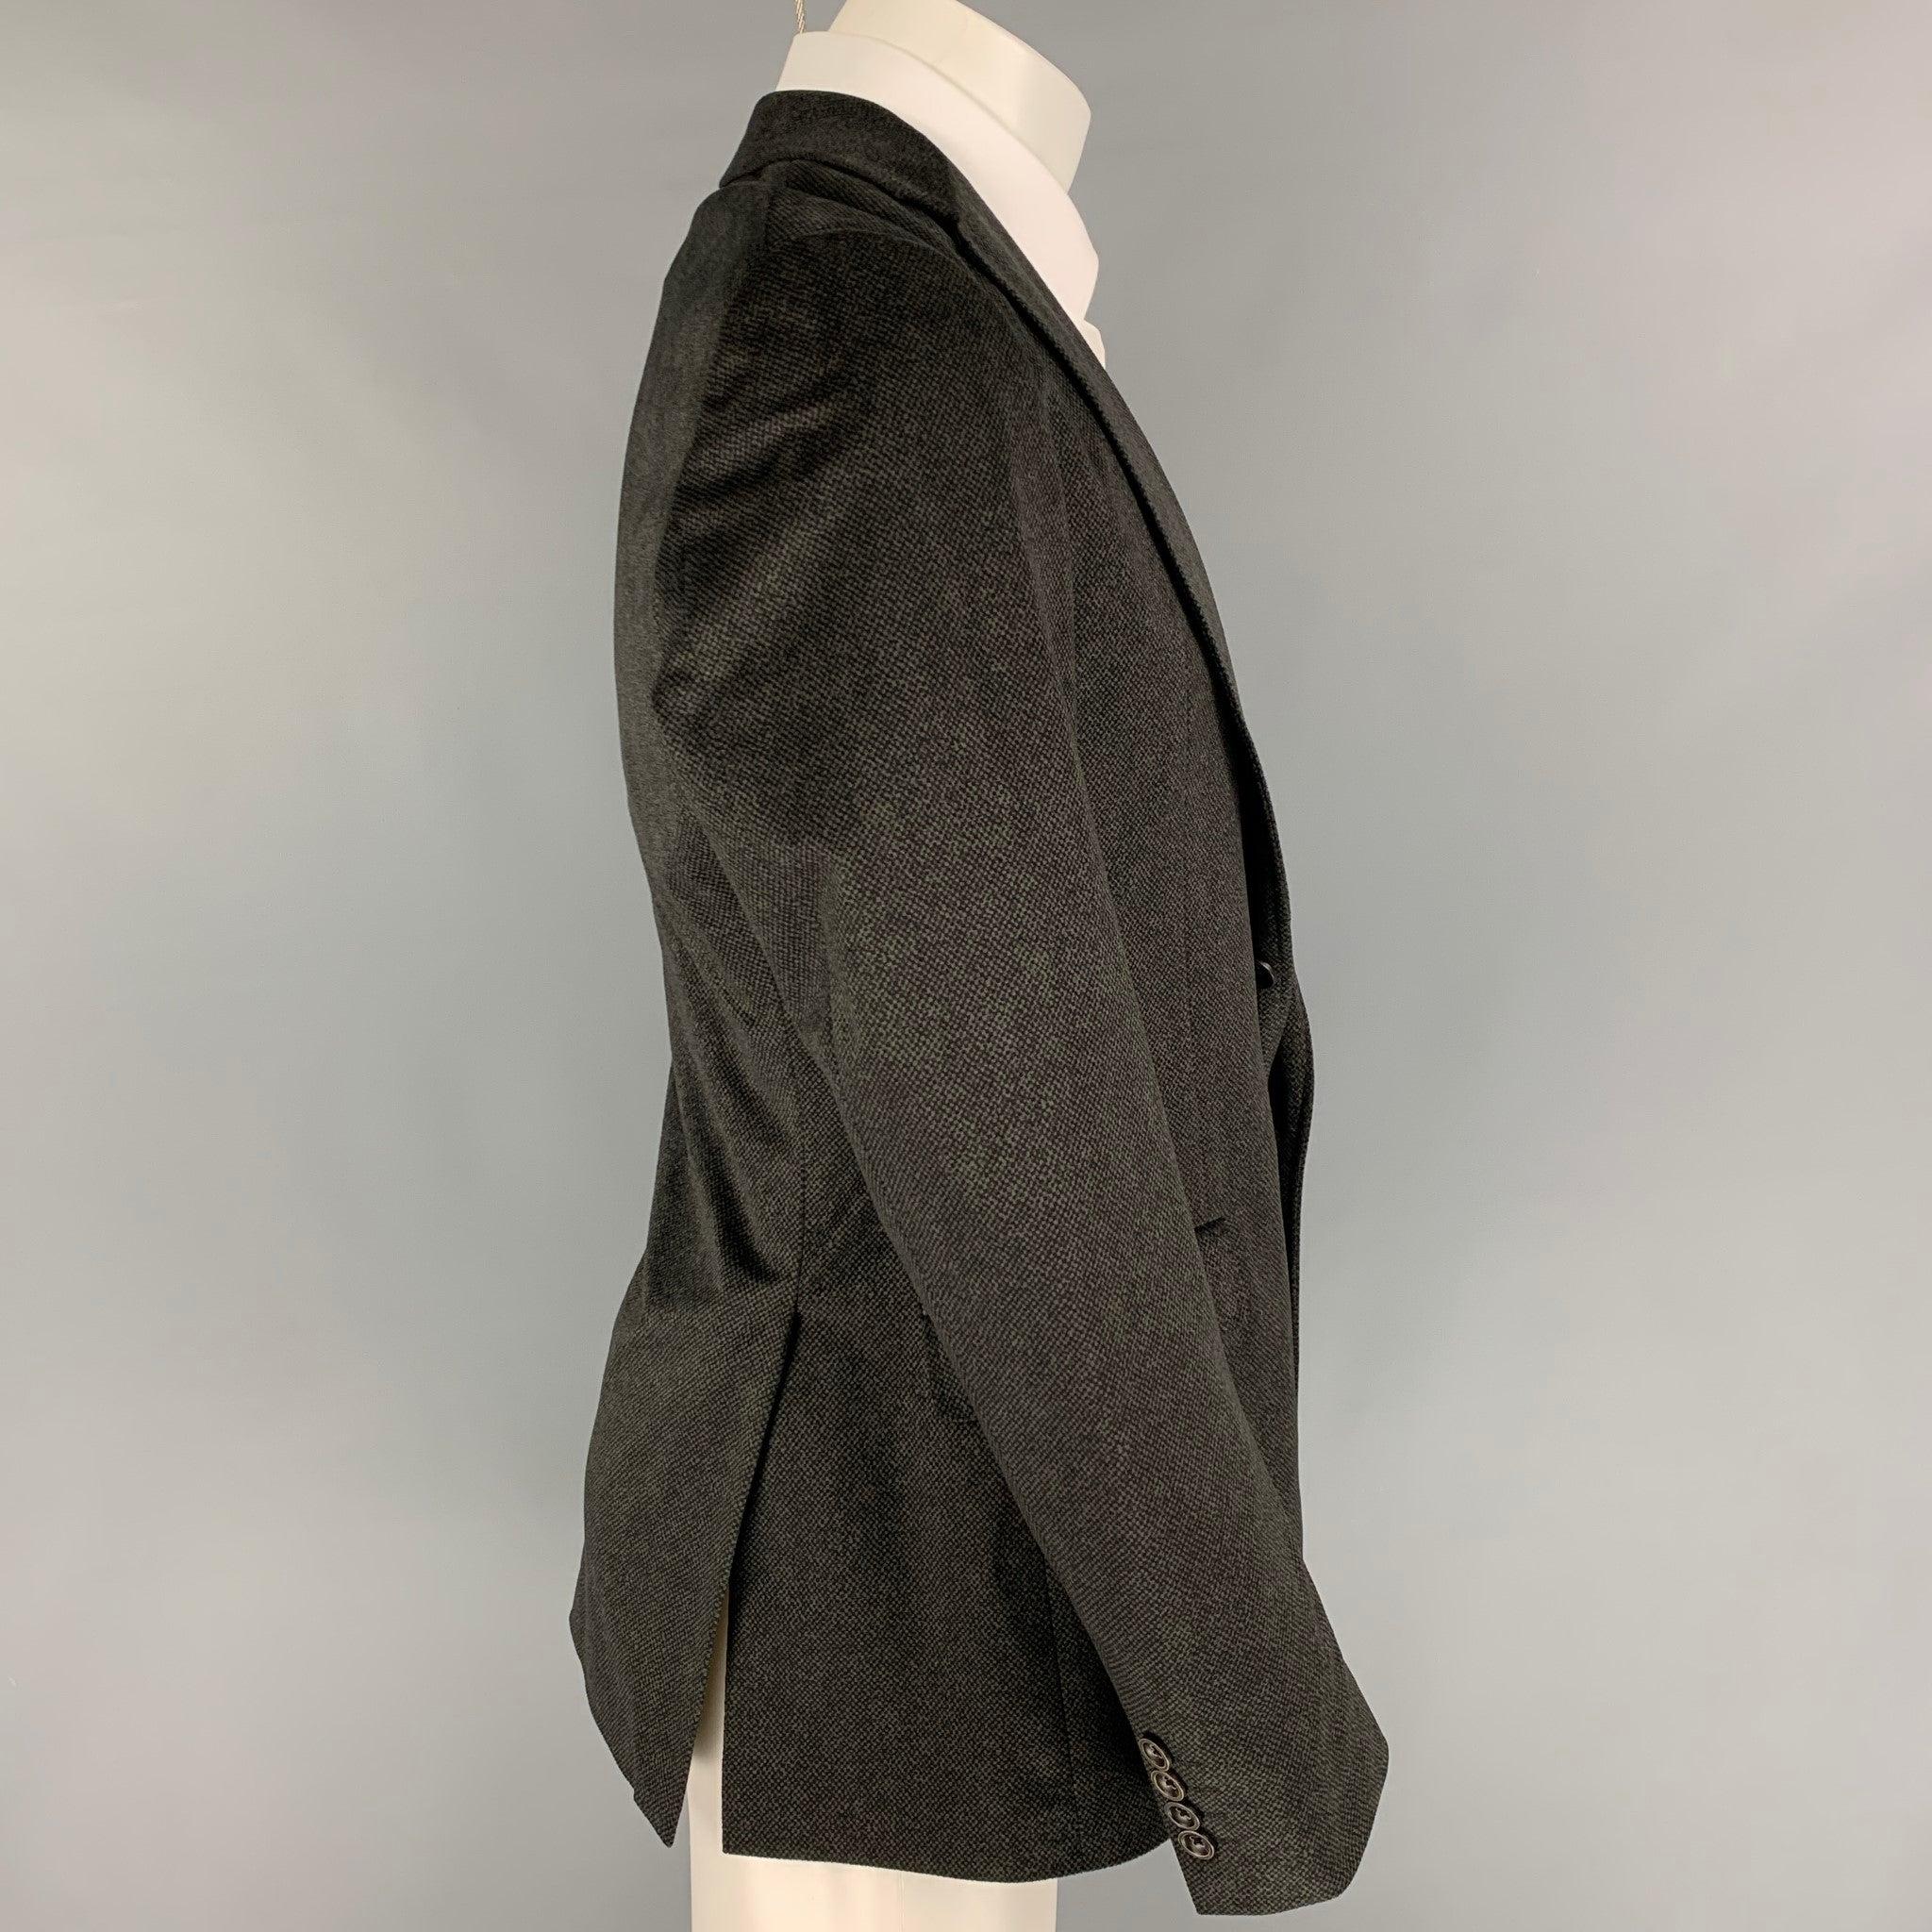 ARMANI COLLEZIONI sport coat comes in a charcoal / black polyester with a full liner featuring a notch lapel, flap pockets, double back vent, and a double button closure.
Very Good
Pre-Owned Condition.  

Marked:   40 

Measurements: 
 
Shoulder: